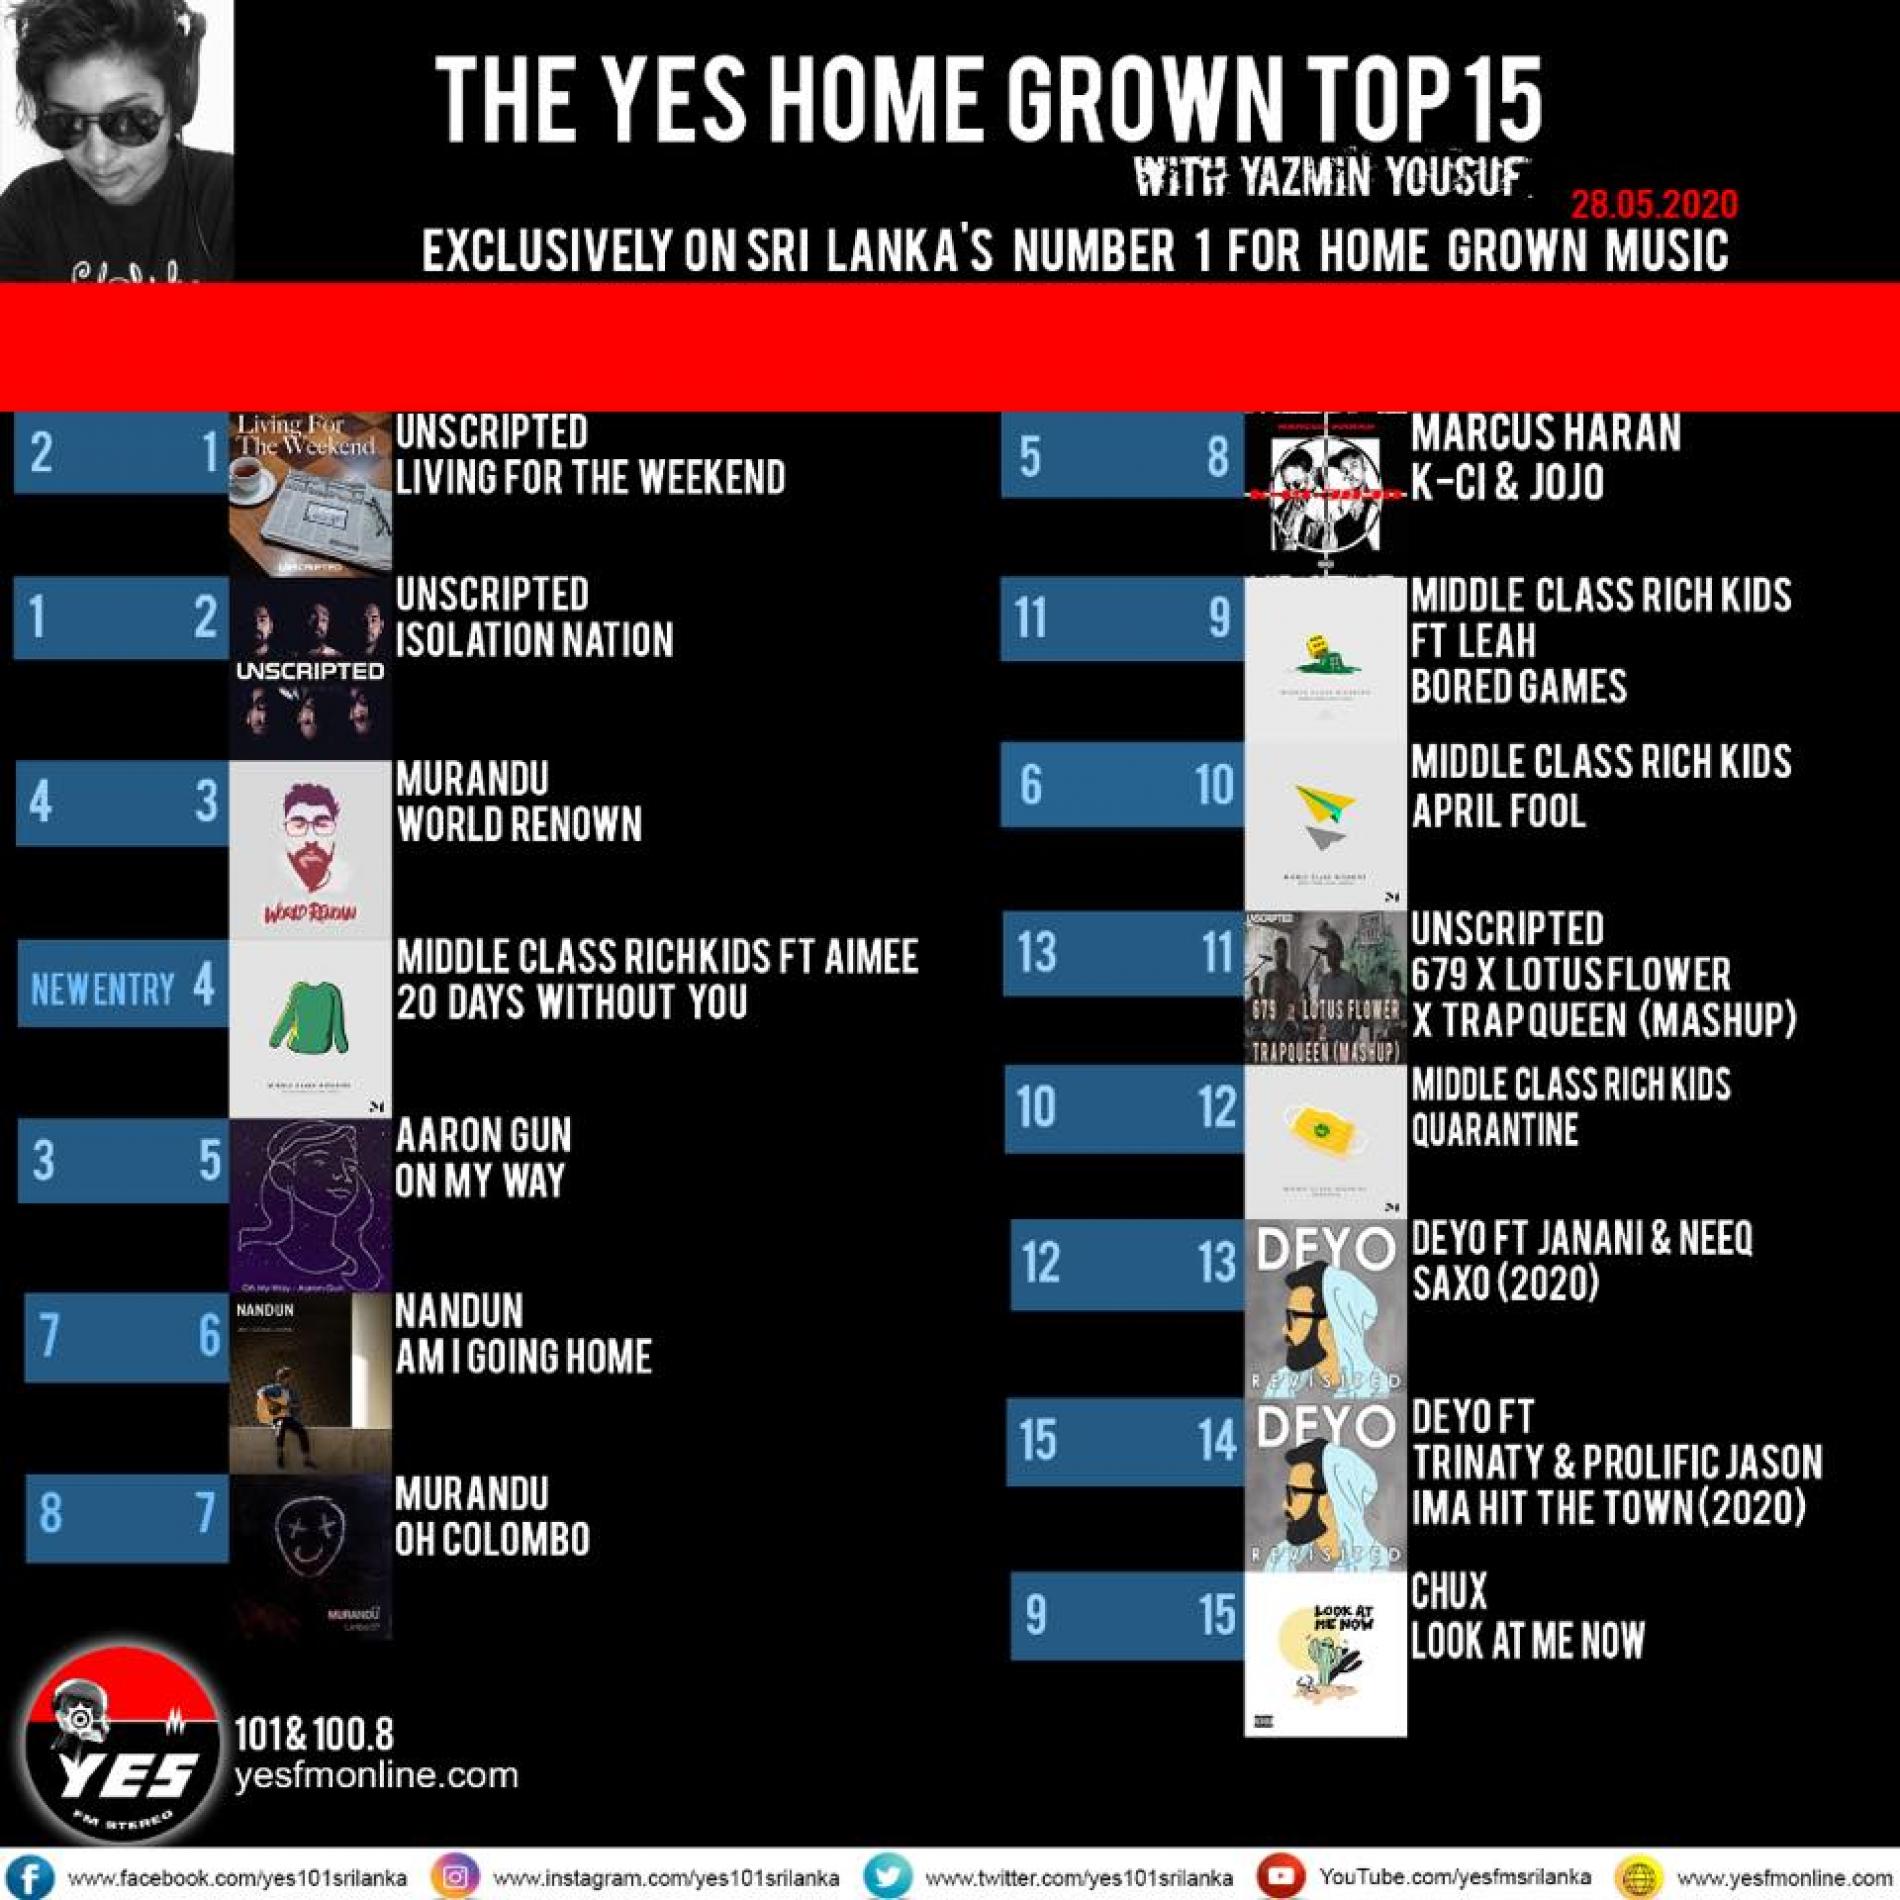 Unscripted Holds On To The Top 2 Of The YES Home Grown Top 15!